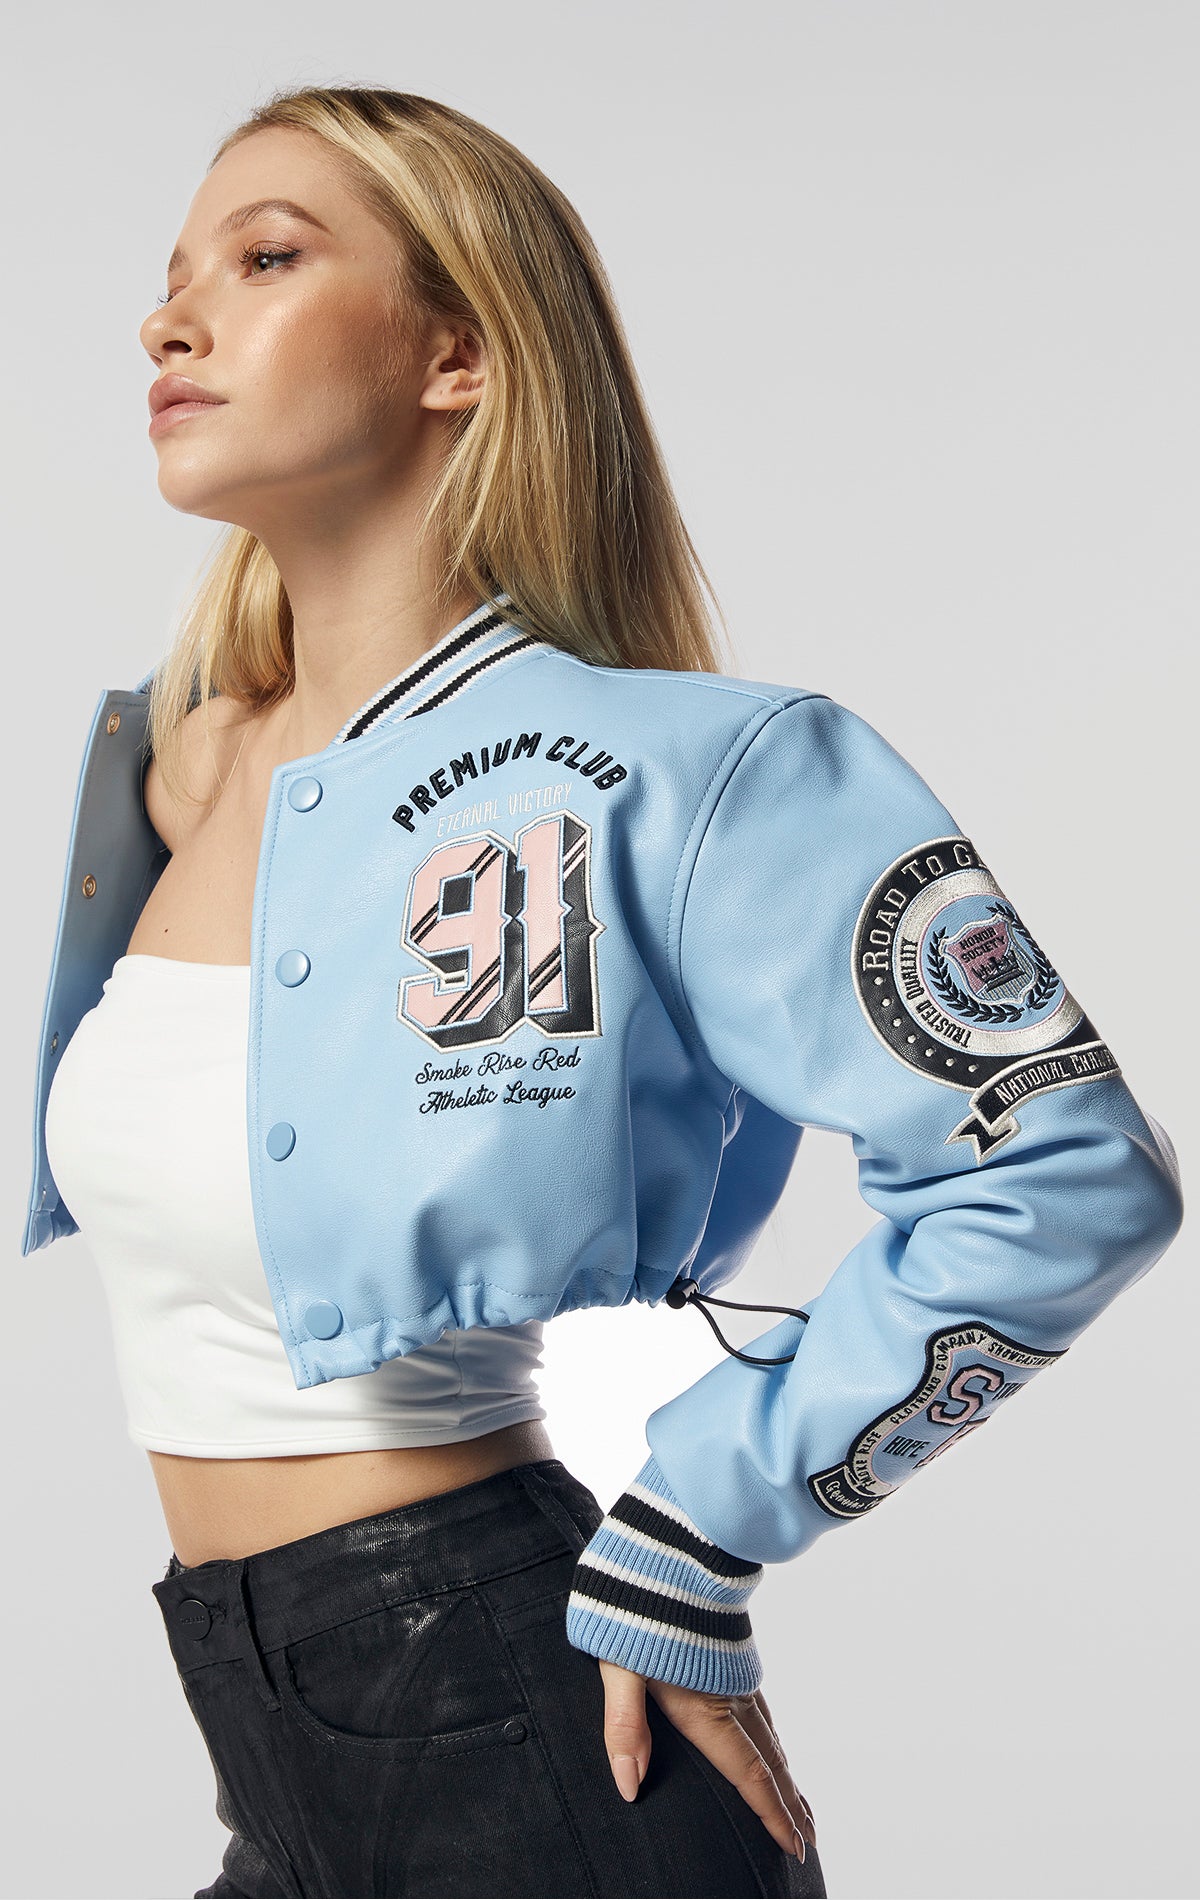 A fitted crop body, soft fabric shell, and quilting inside make up this women's varsity jacket. With its cotton span rib, twill, embo, and 3D patches, it's a stylish and comfortable addition to any wardrobe. The adjustable bottom opening, complete with bungee cord, adds a customizable touch.